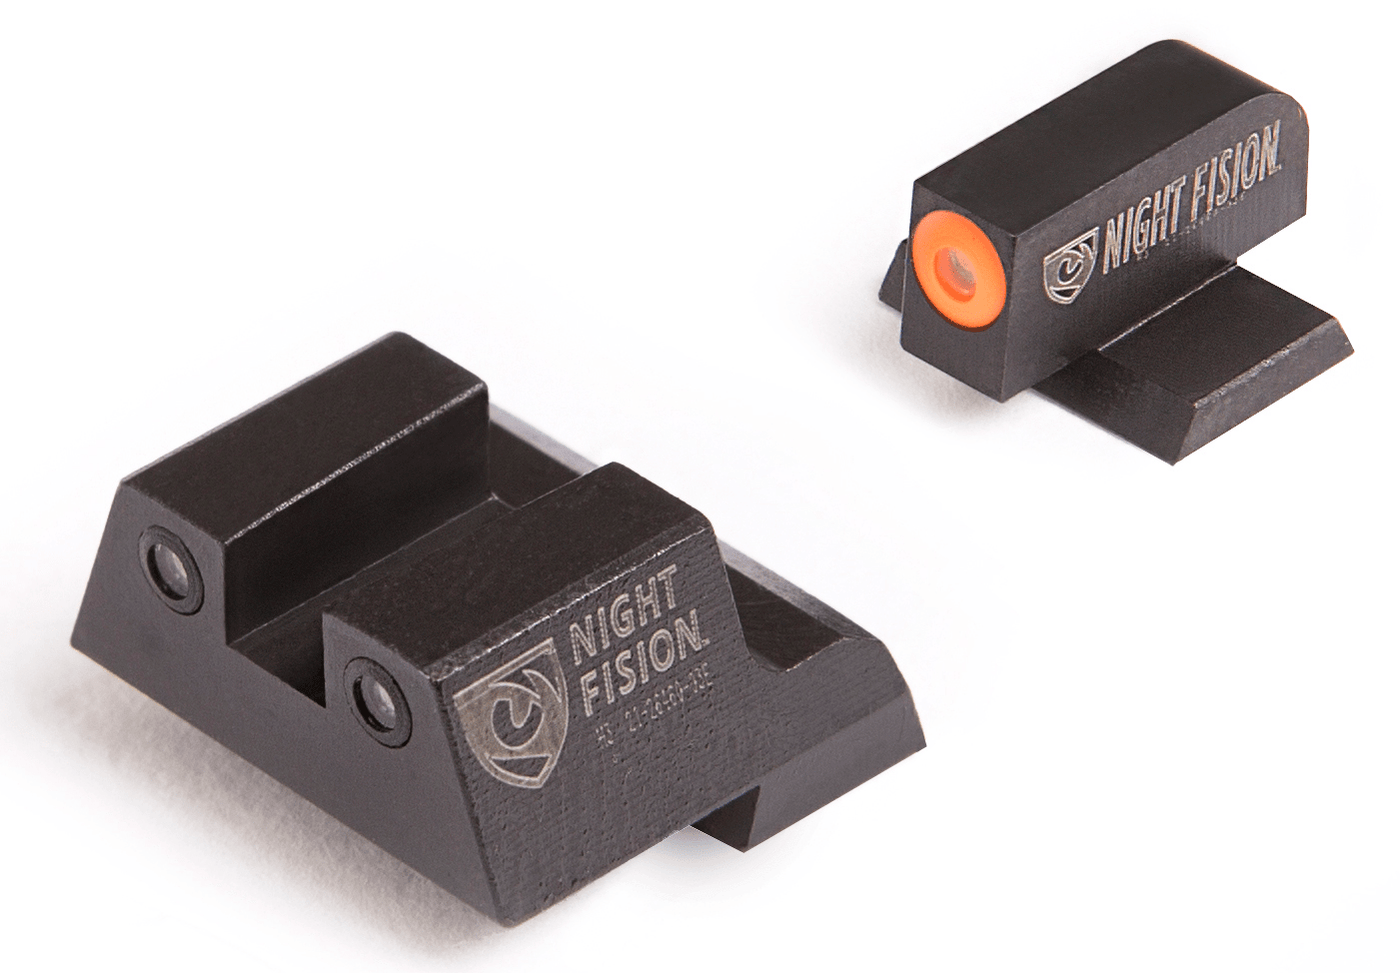 Night Fision Night Fision Perfect Dot, Nf Cnk-027-003-ogzg     Ns Canik Tp9 Square Firearm Accessories